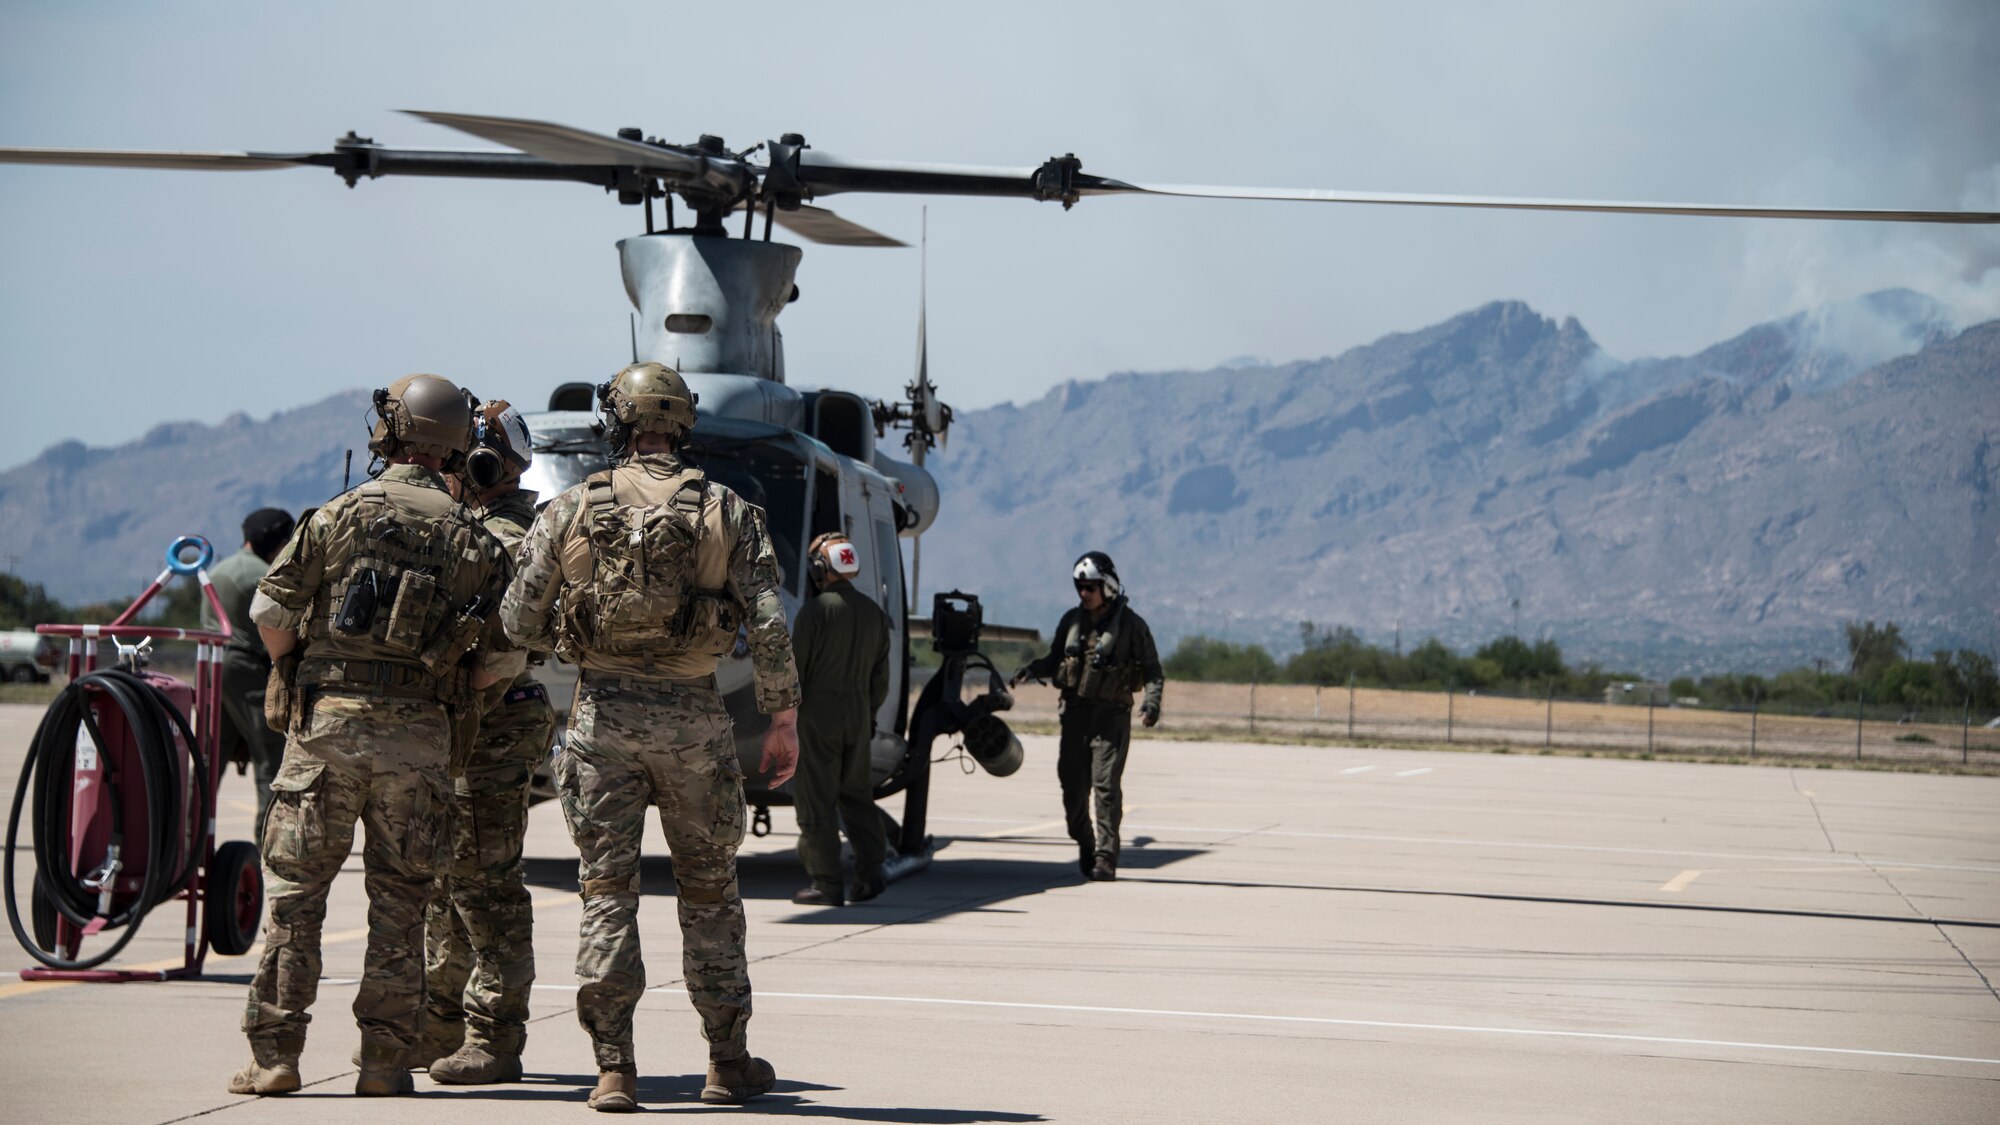 A photo of Airmen preparing to board a helicopter